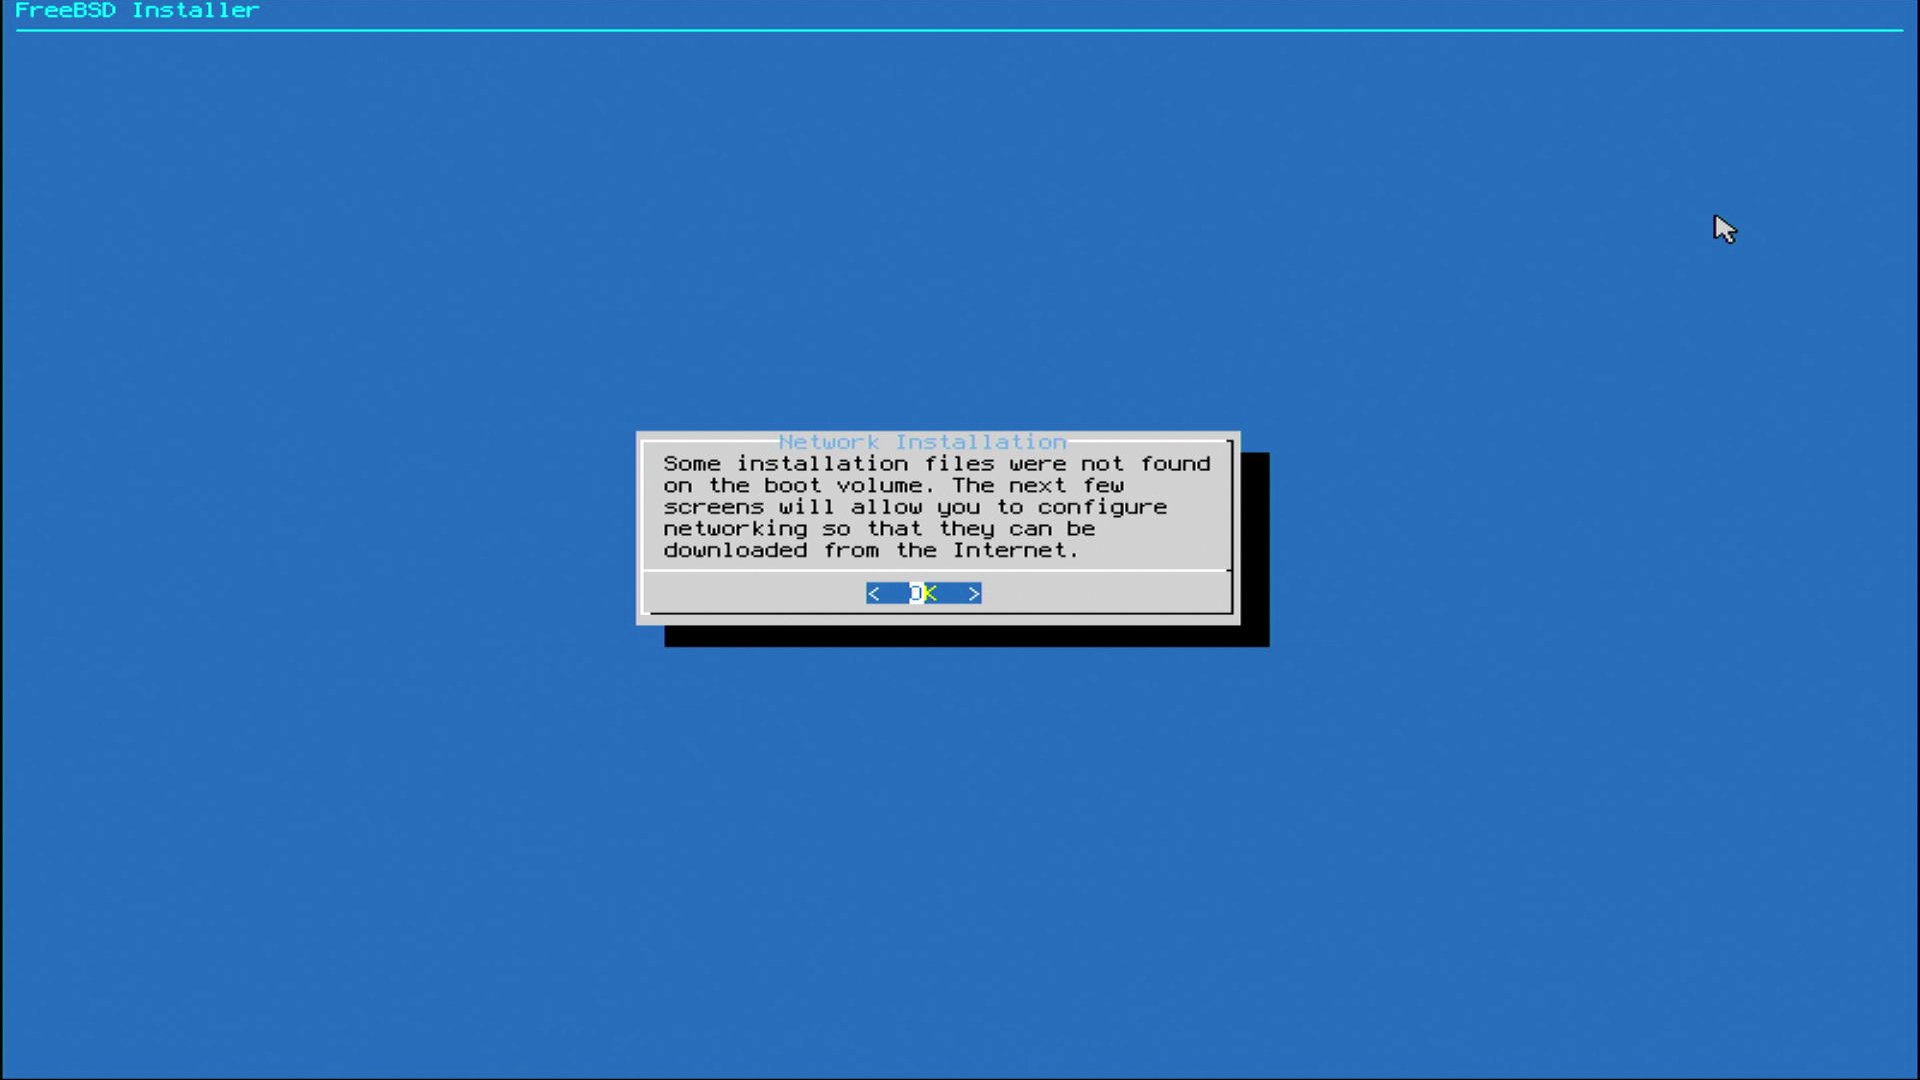 FreeBSD-Instalation-6.png